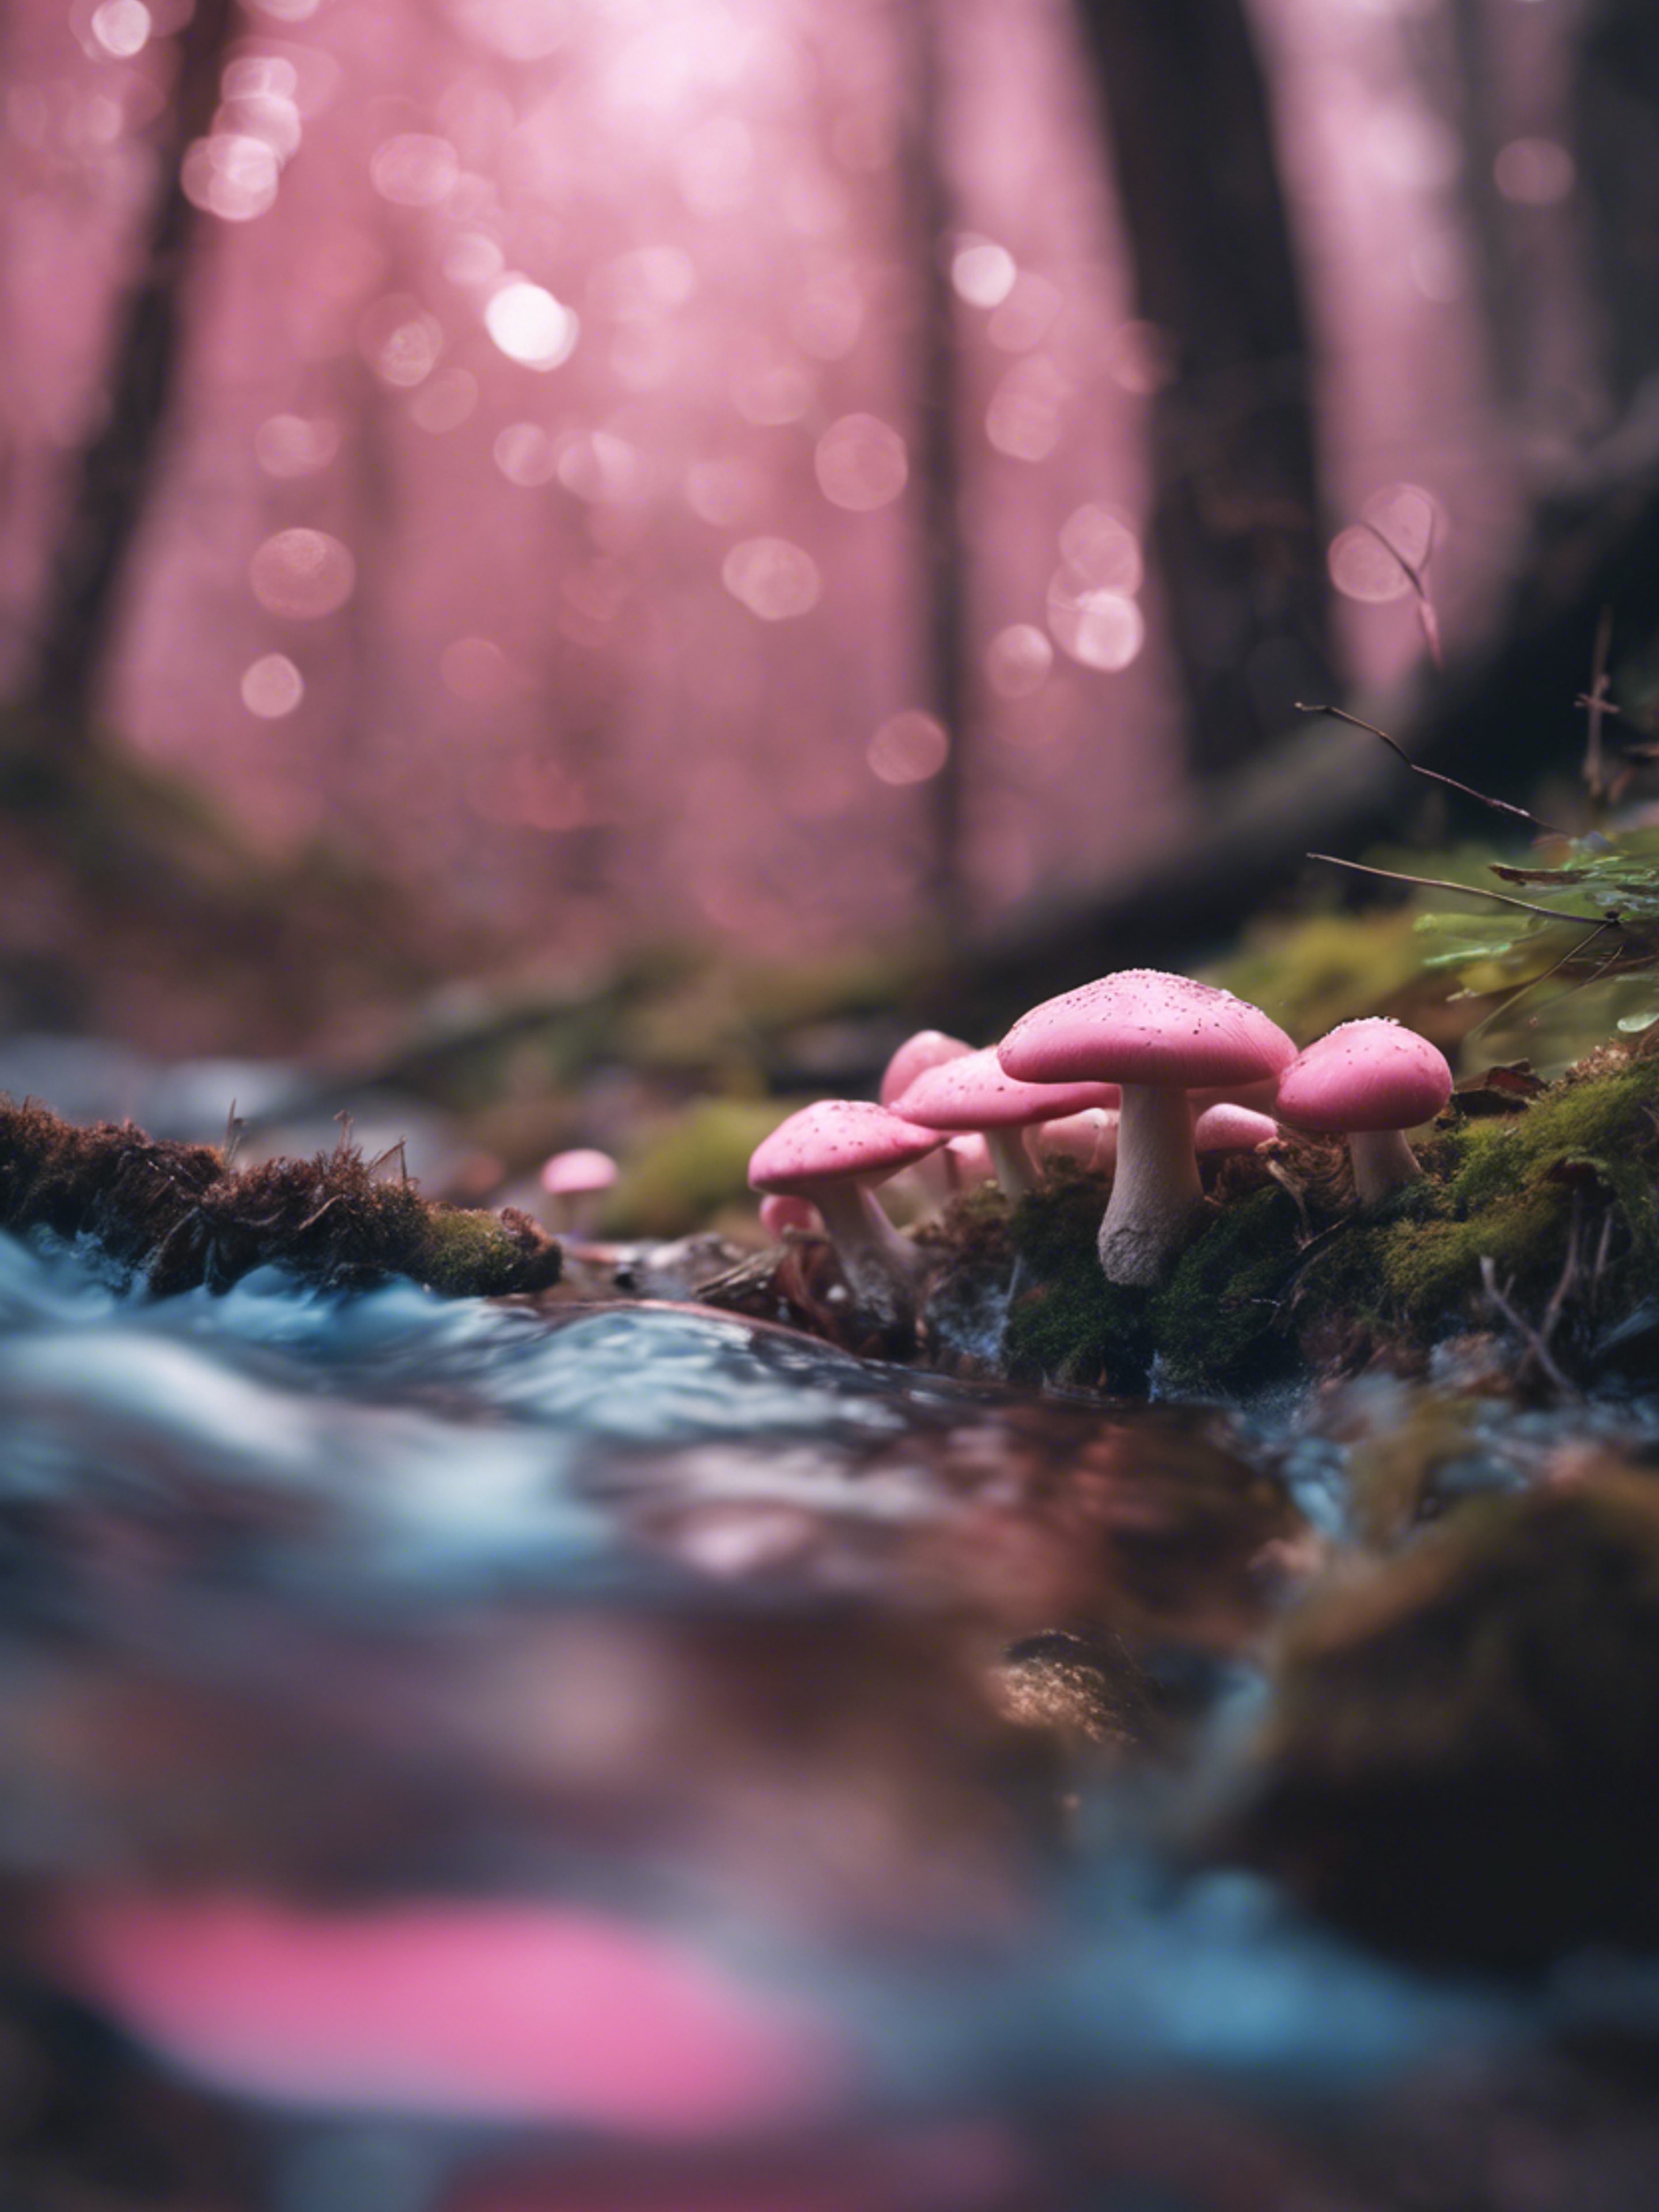 A scenic landscape of cute pink mushrooms growing next to a sparkling blue brook flowing through a mystic forest. 벽지[15649bdf42124ca6856a]